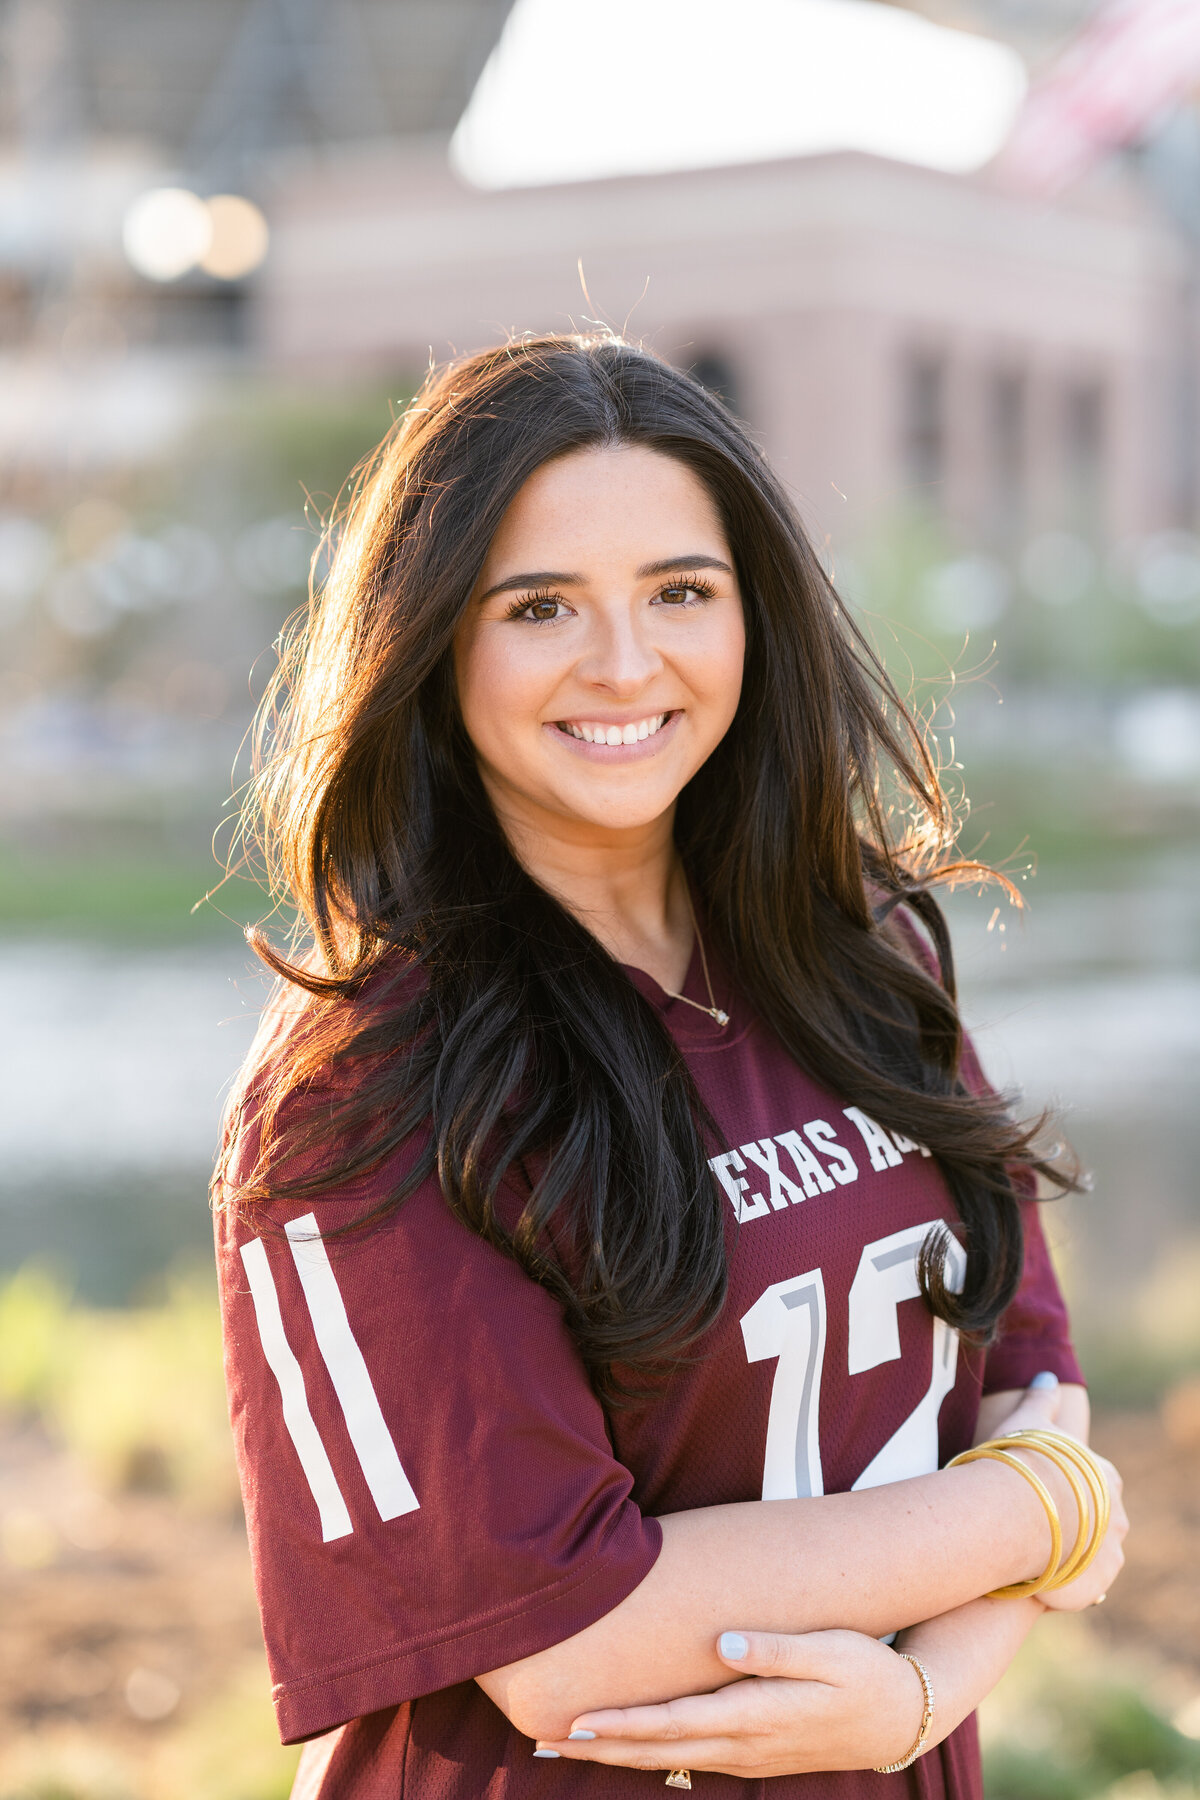 Texas A&M senior girl smiling with arms crossed wearing maroon Aggie jersey in Aggie Park at sunset